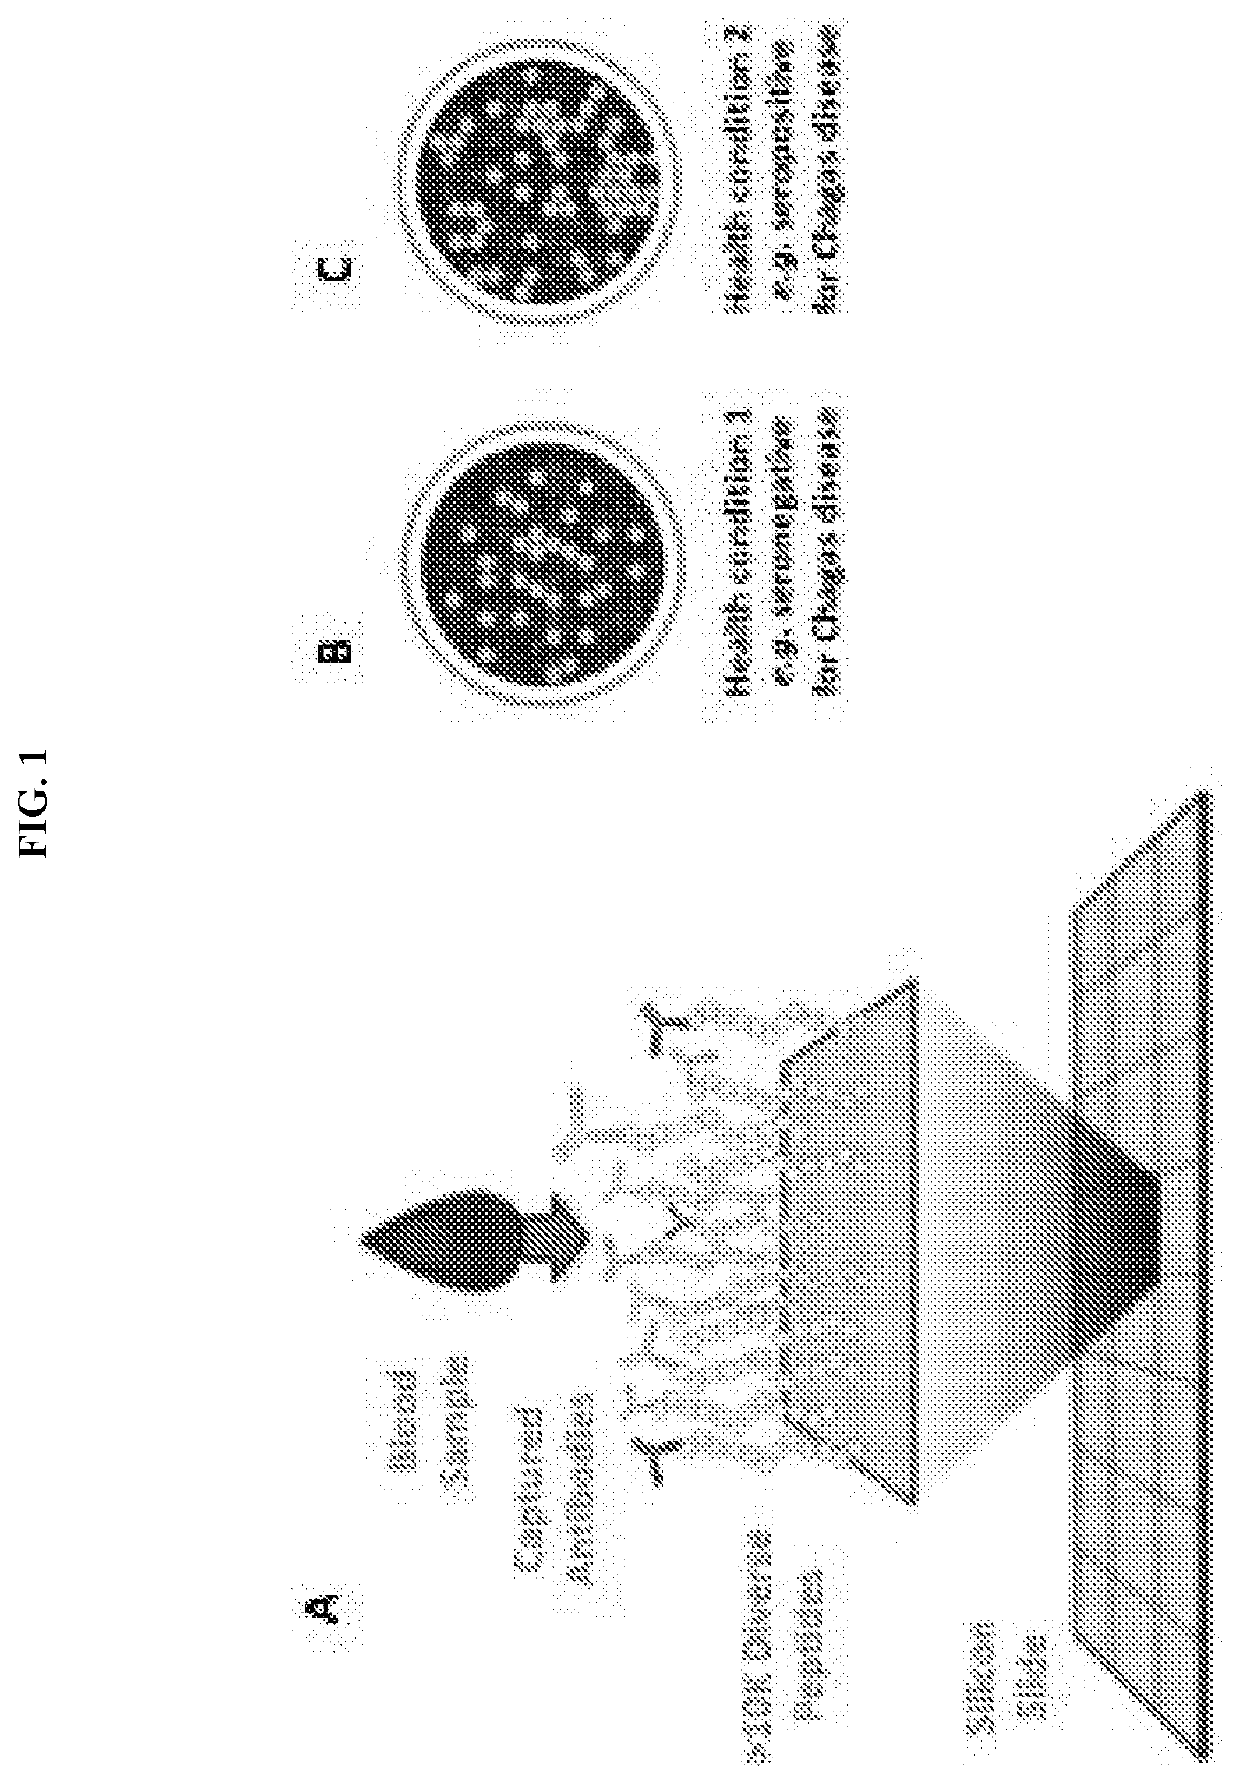 Methods for screening infections